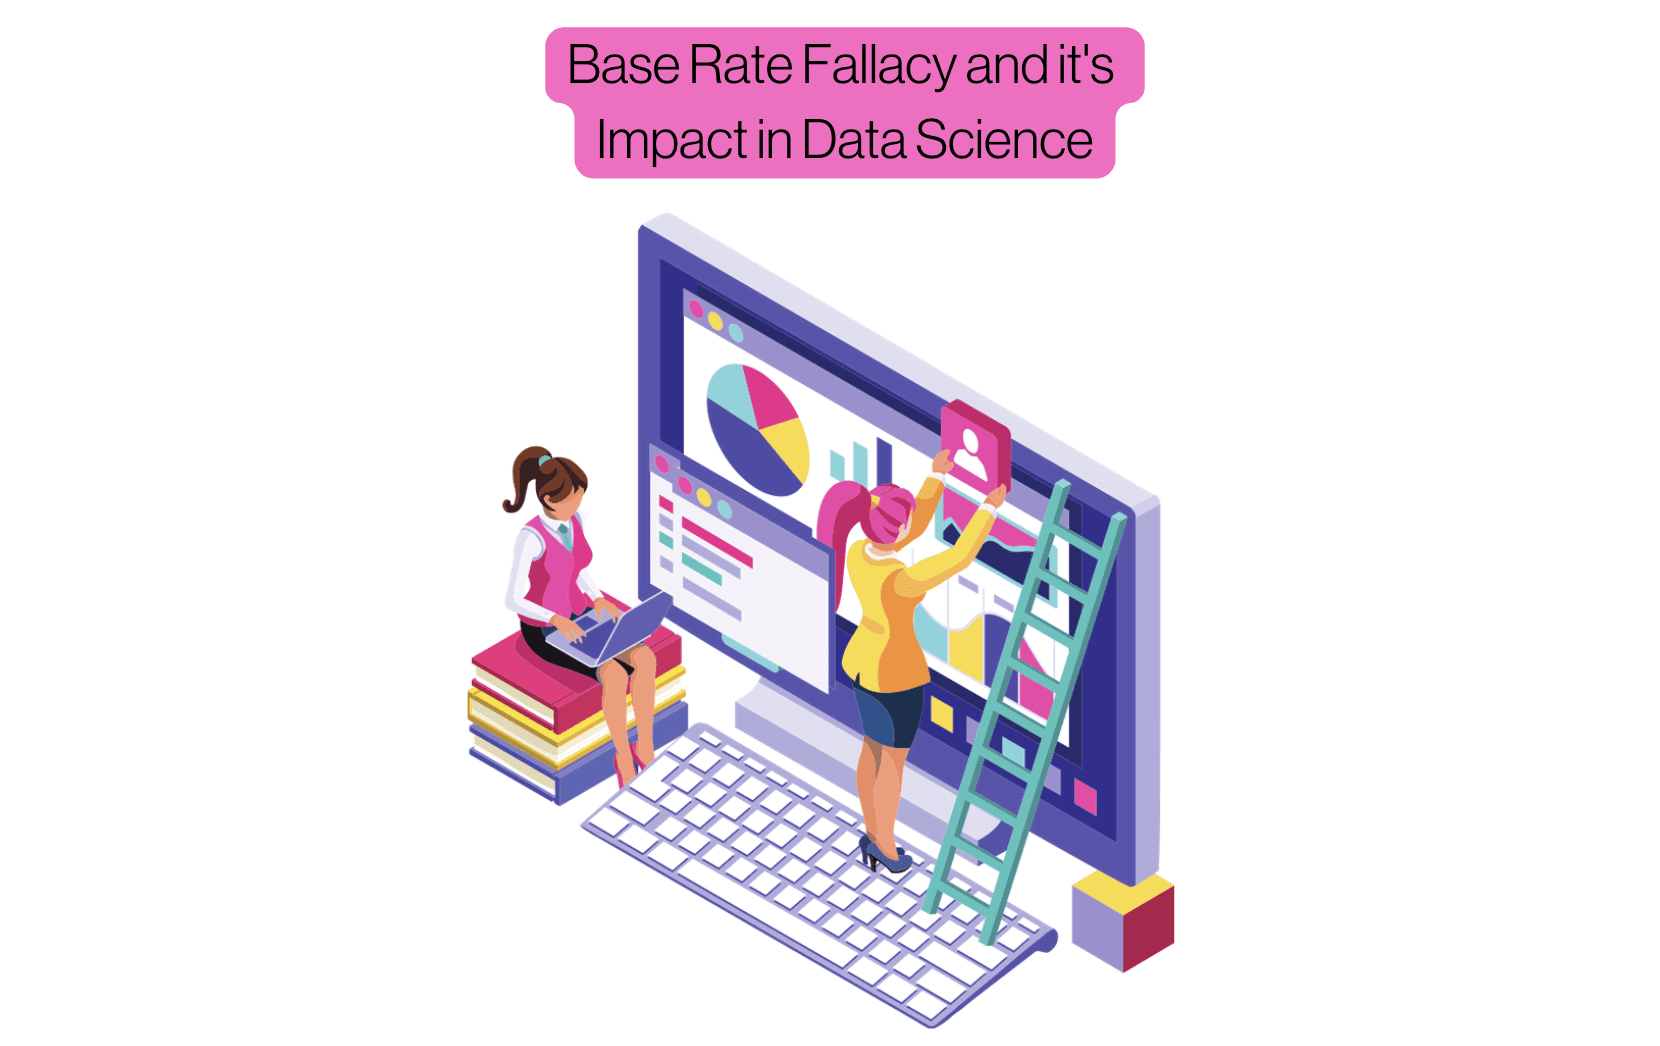 The Base Rate Fallacy and its Impact on Data Science